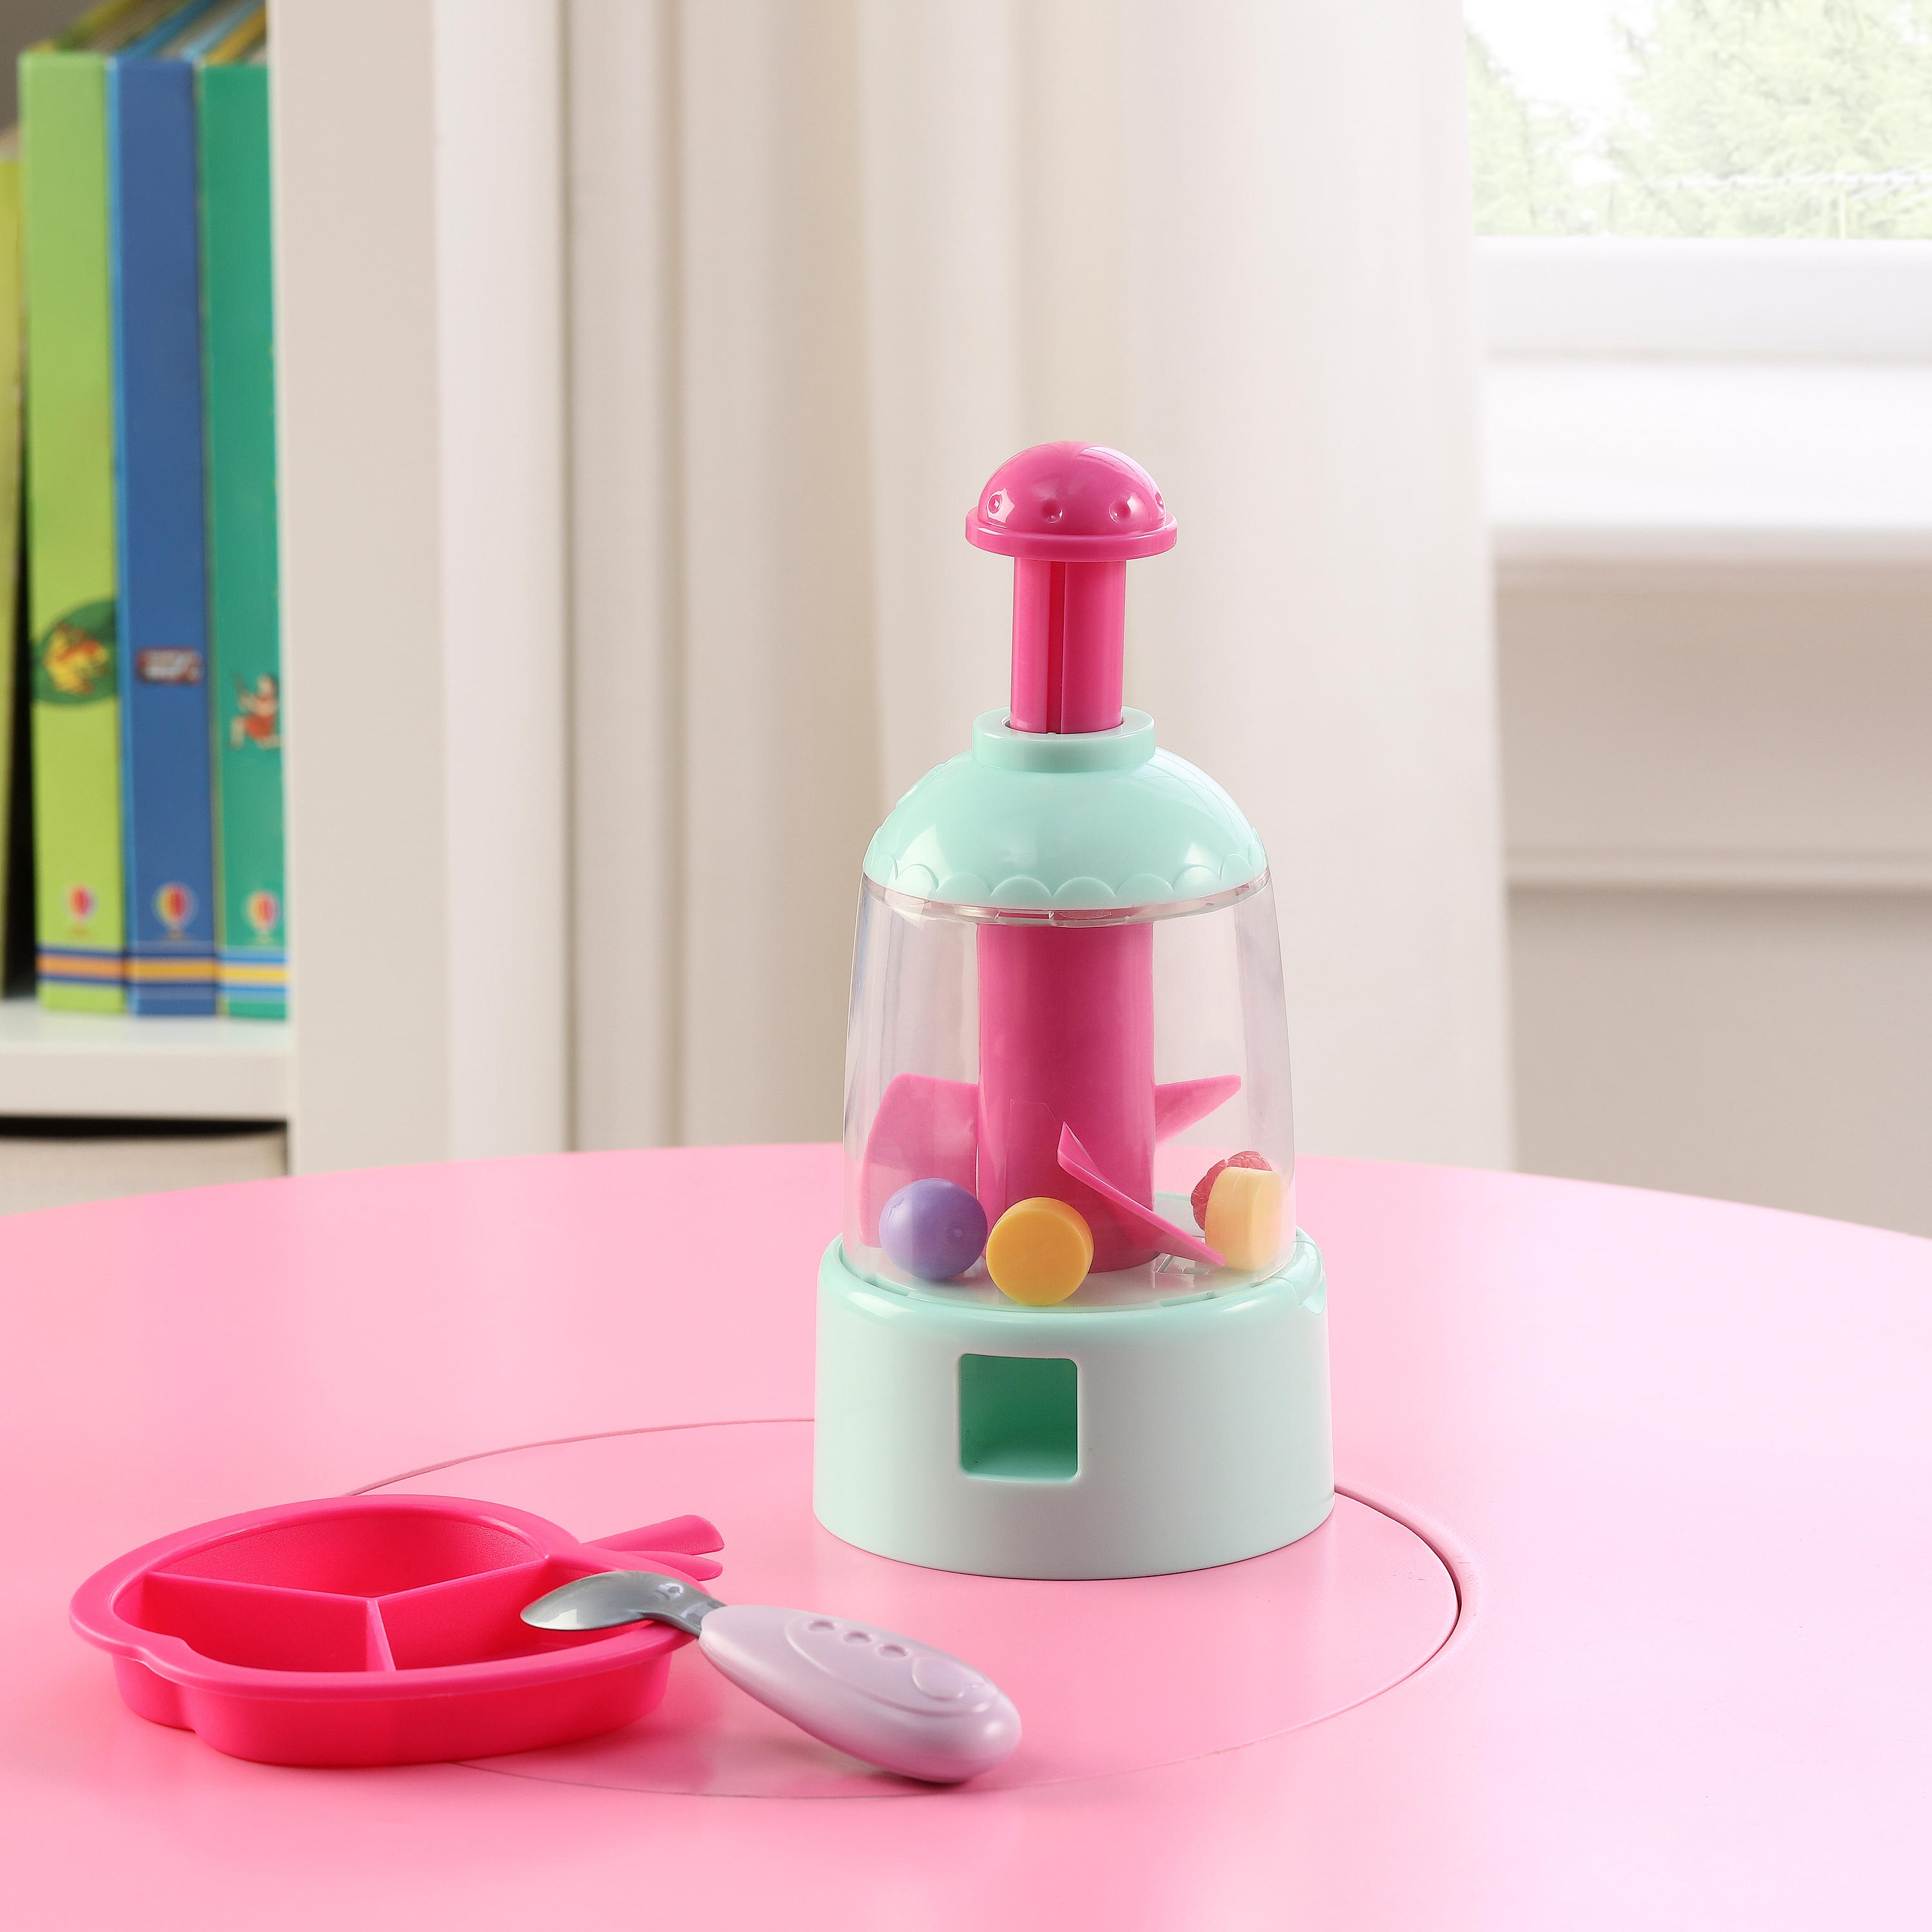 My Sweet Love Food Blender Toy Accessory Play Set, 9 Pieces - image 2 of 5